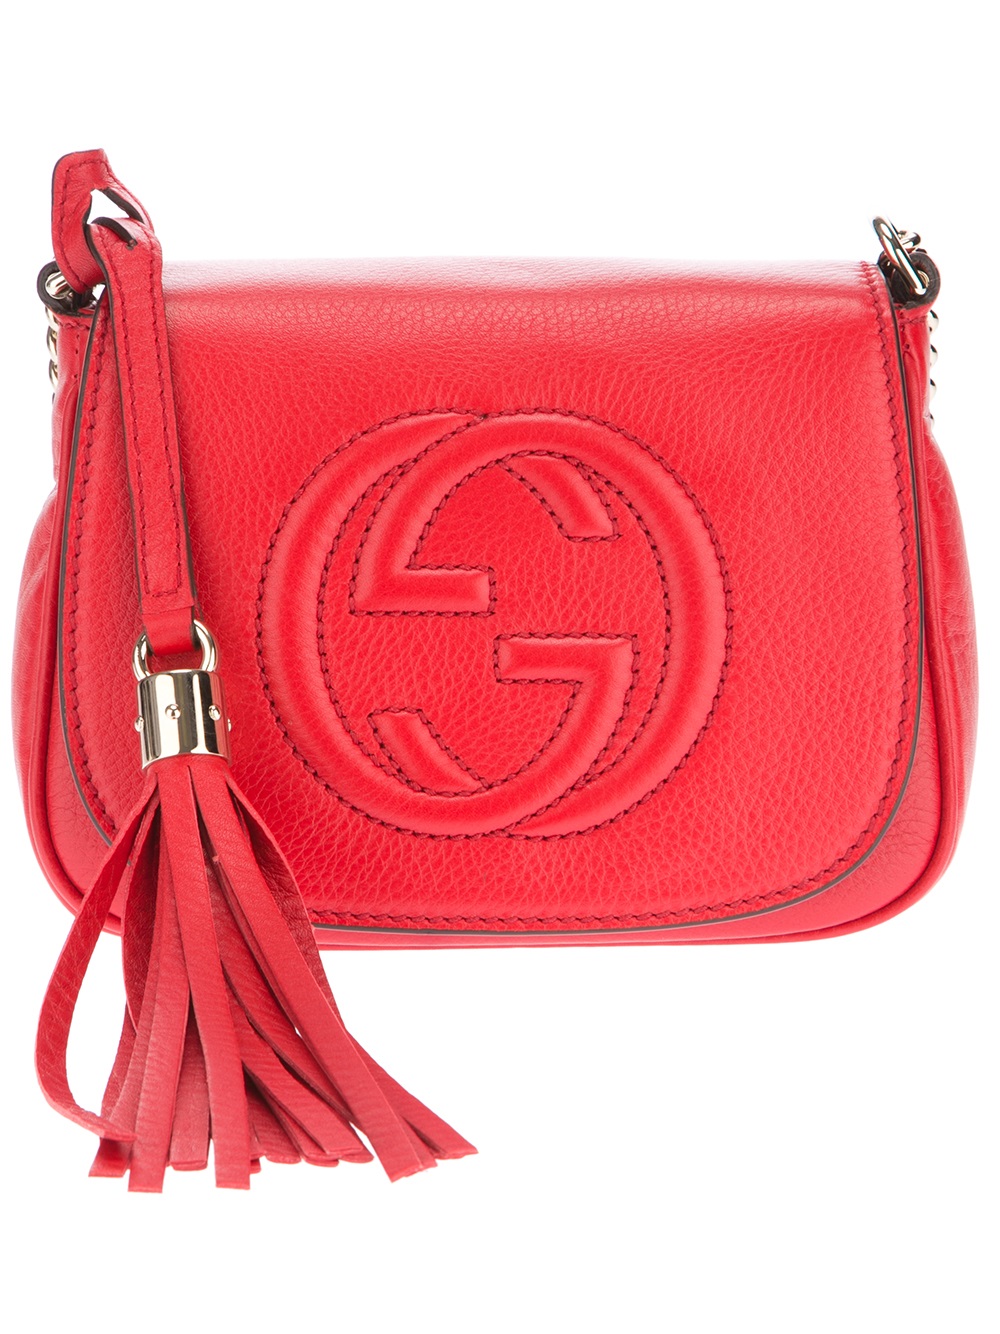 Gucci Soho Chain Shoulder Bag in Red | Lyst